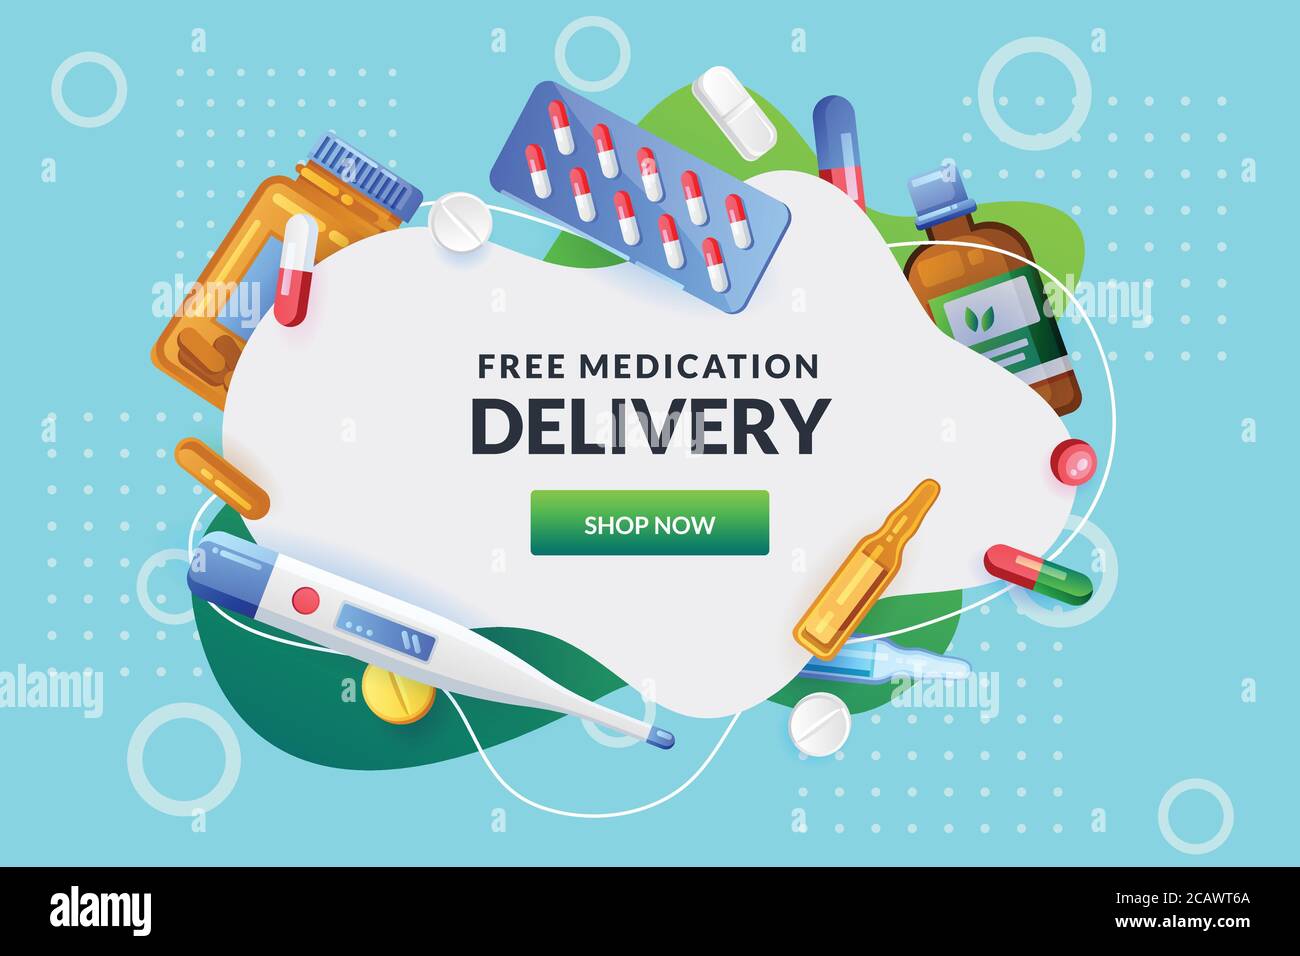 Pharmacy abstract white frame with pills, drugs, medical bottles. Drugstore vector background. Medicine, healthcare or home delivery service banner, p Stock Vector